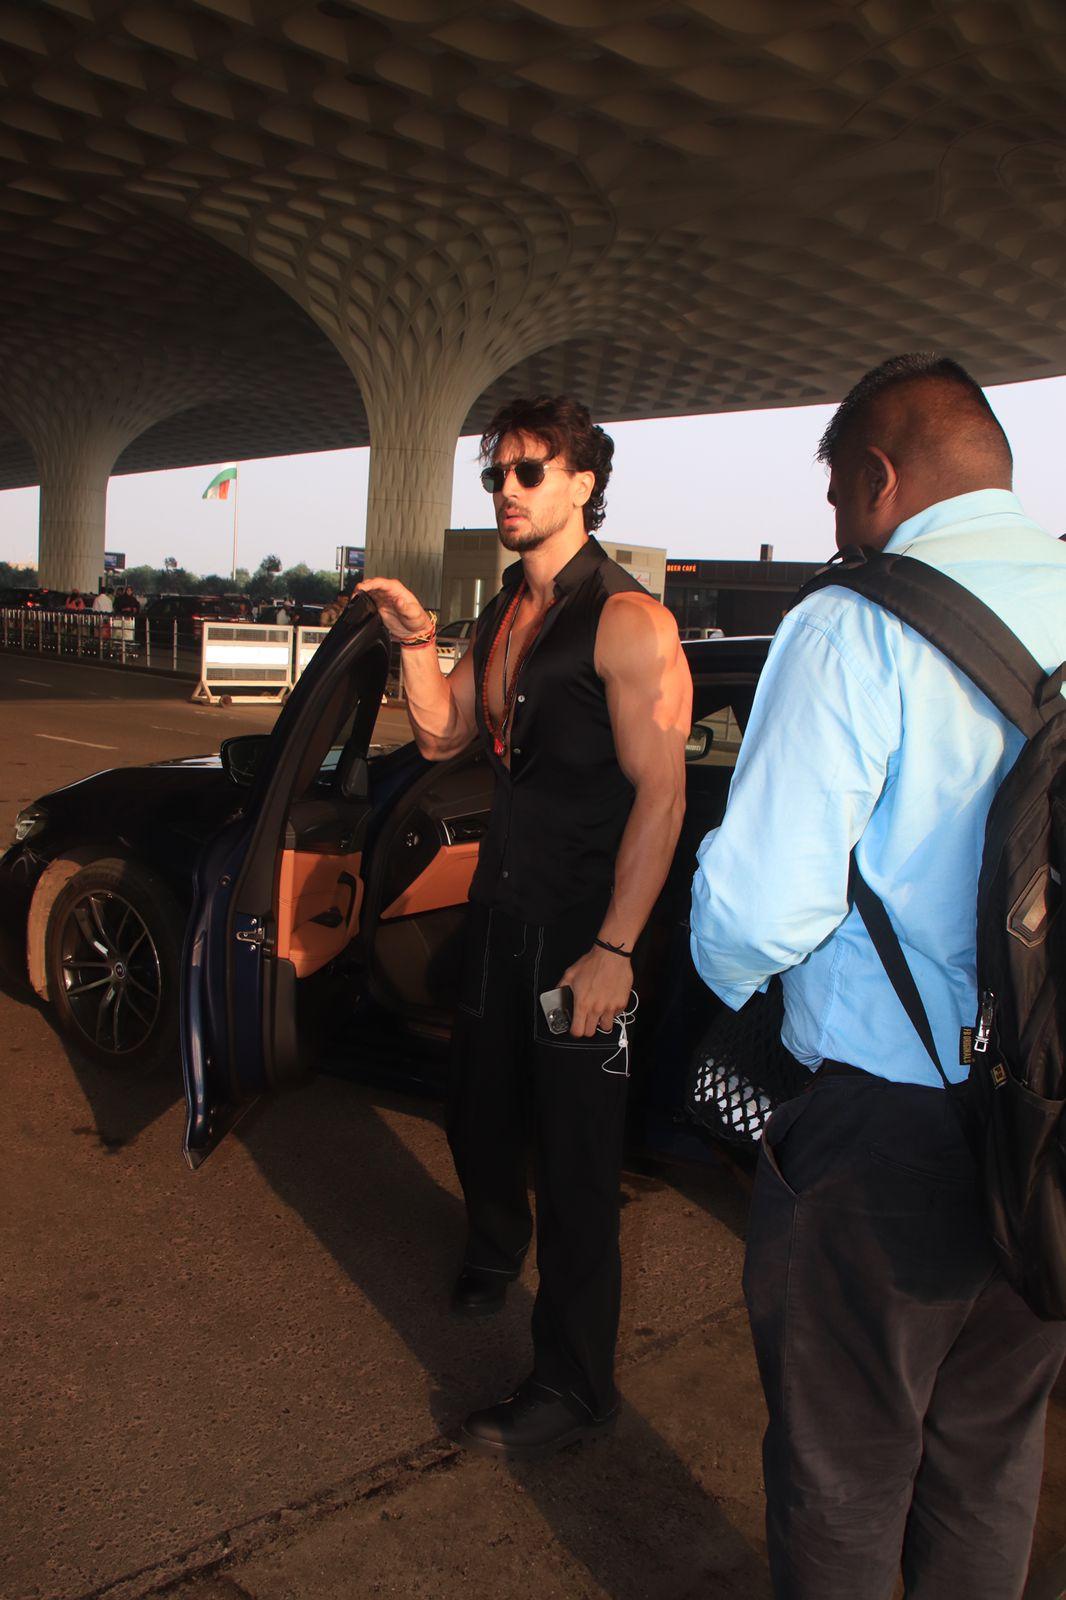 Tiger Shroff was not far behind his co-star Kriti Sanon, he too was spotted at the airport this morning